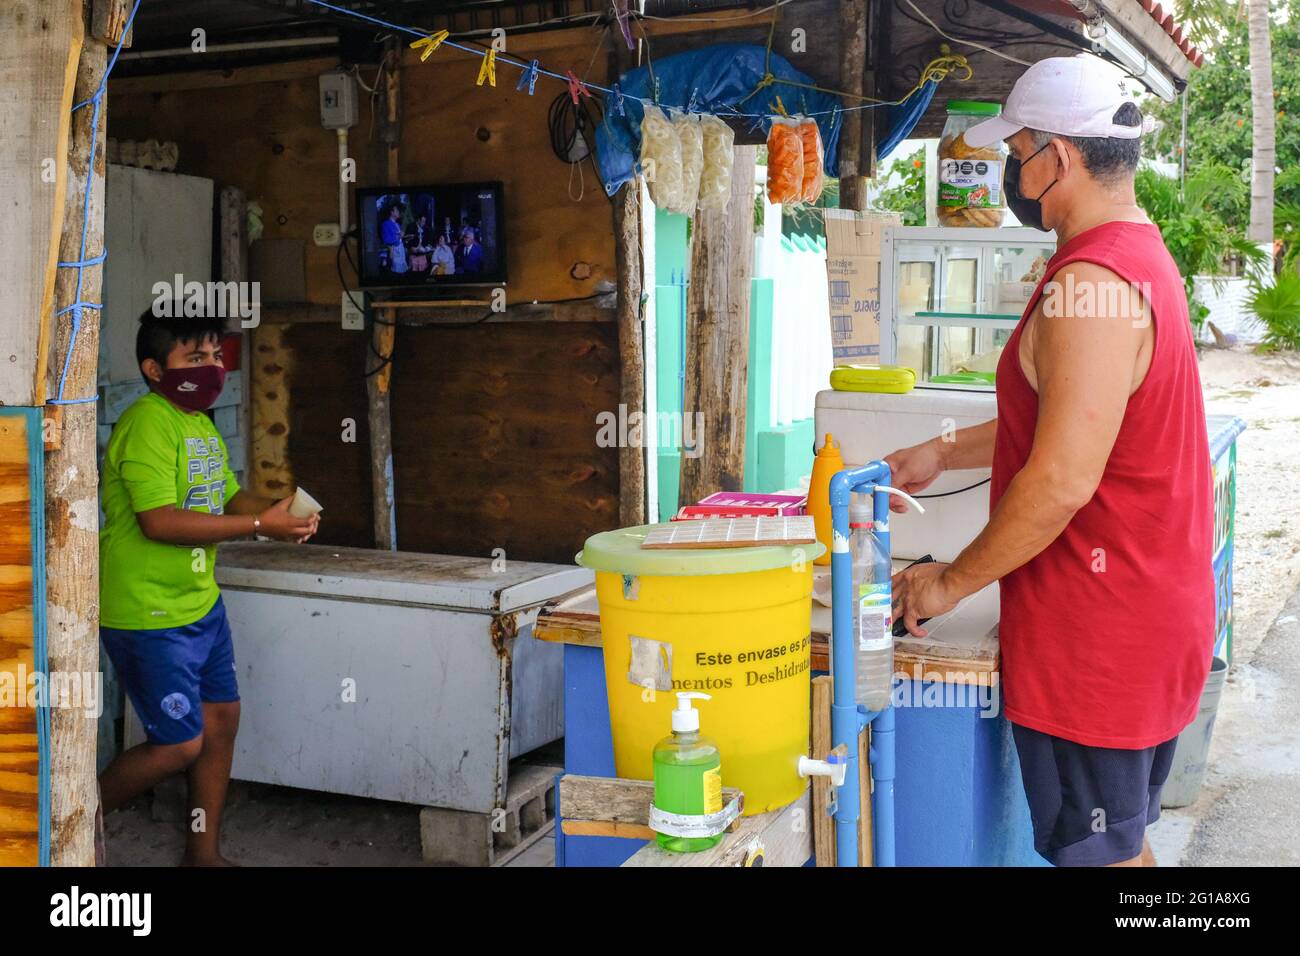 Covid Pandemic: Small roadside shop in Yucatan Mexico. The clients and workers are wearing face masks and hand sanitizer is available . All small businesses take precautions while trying to stay open to survive Stock Photo